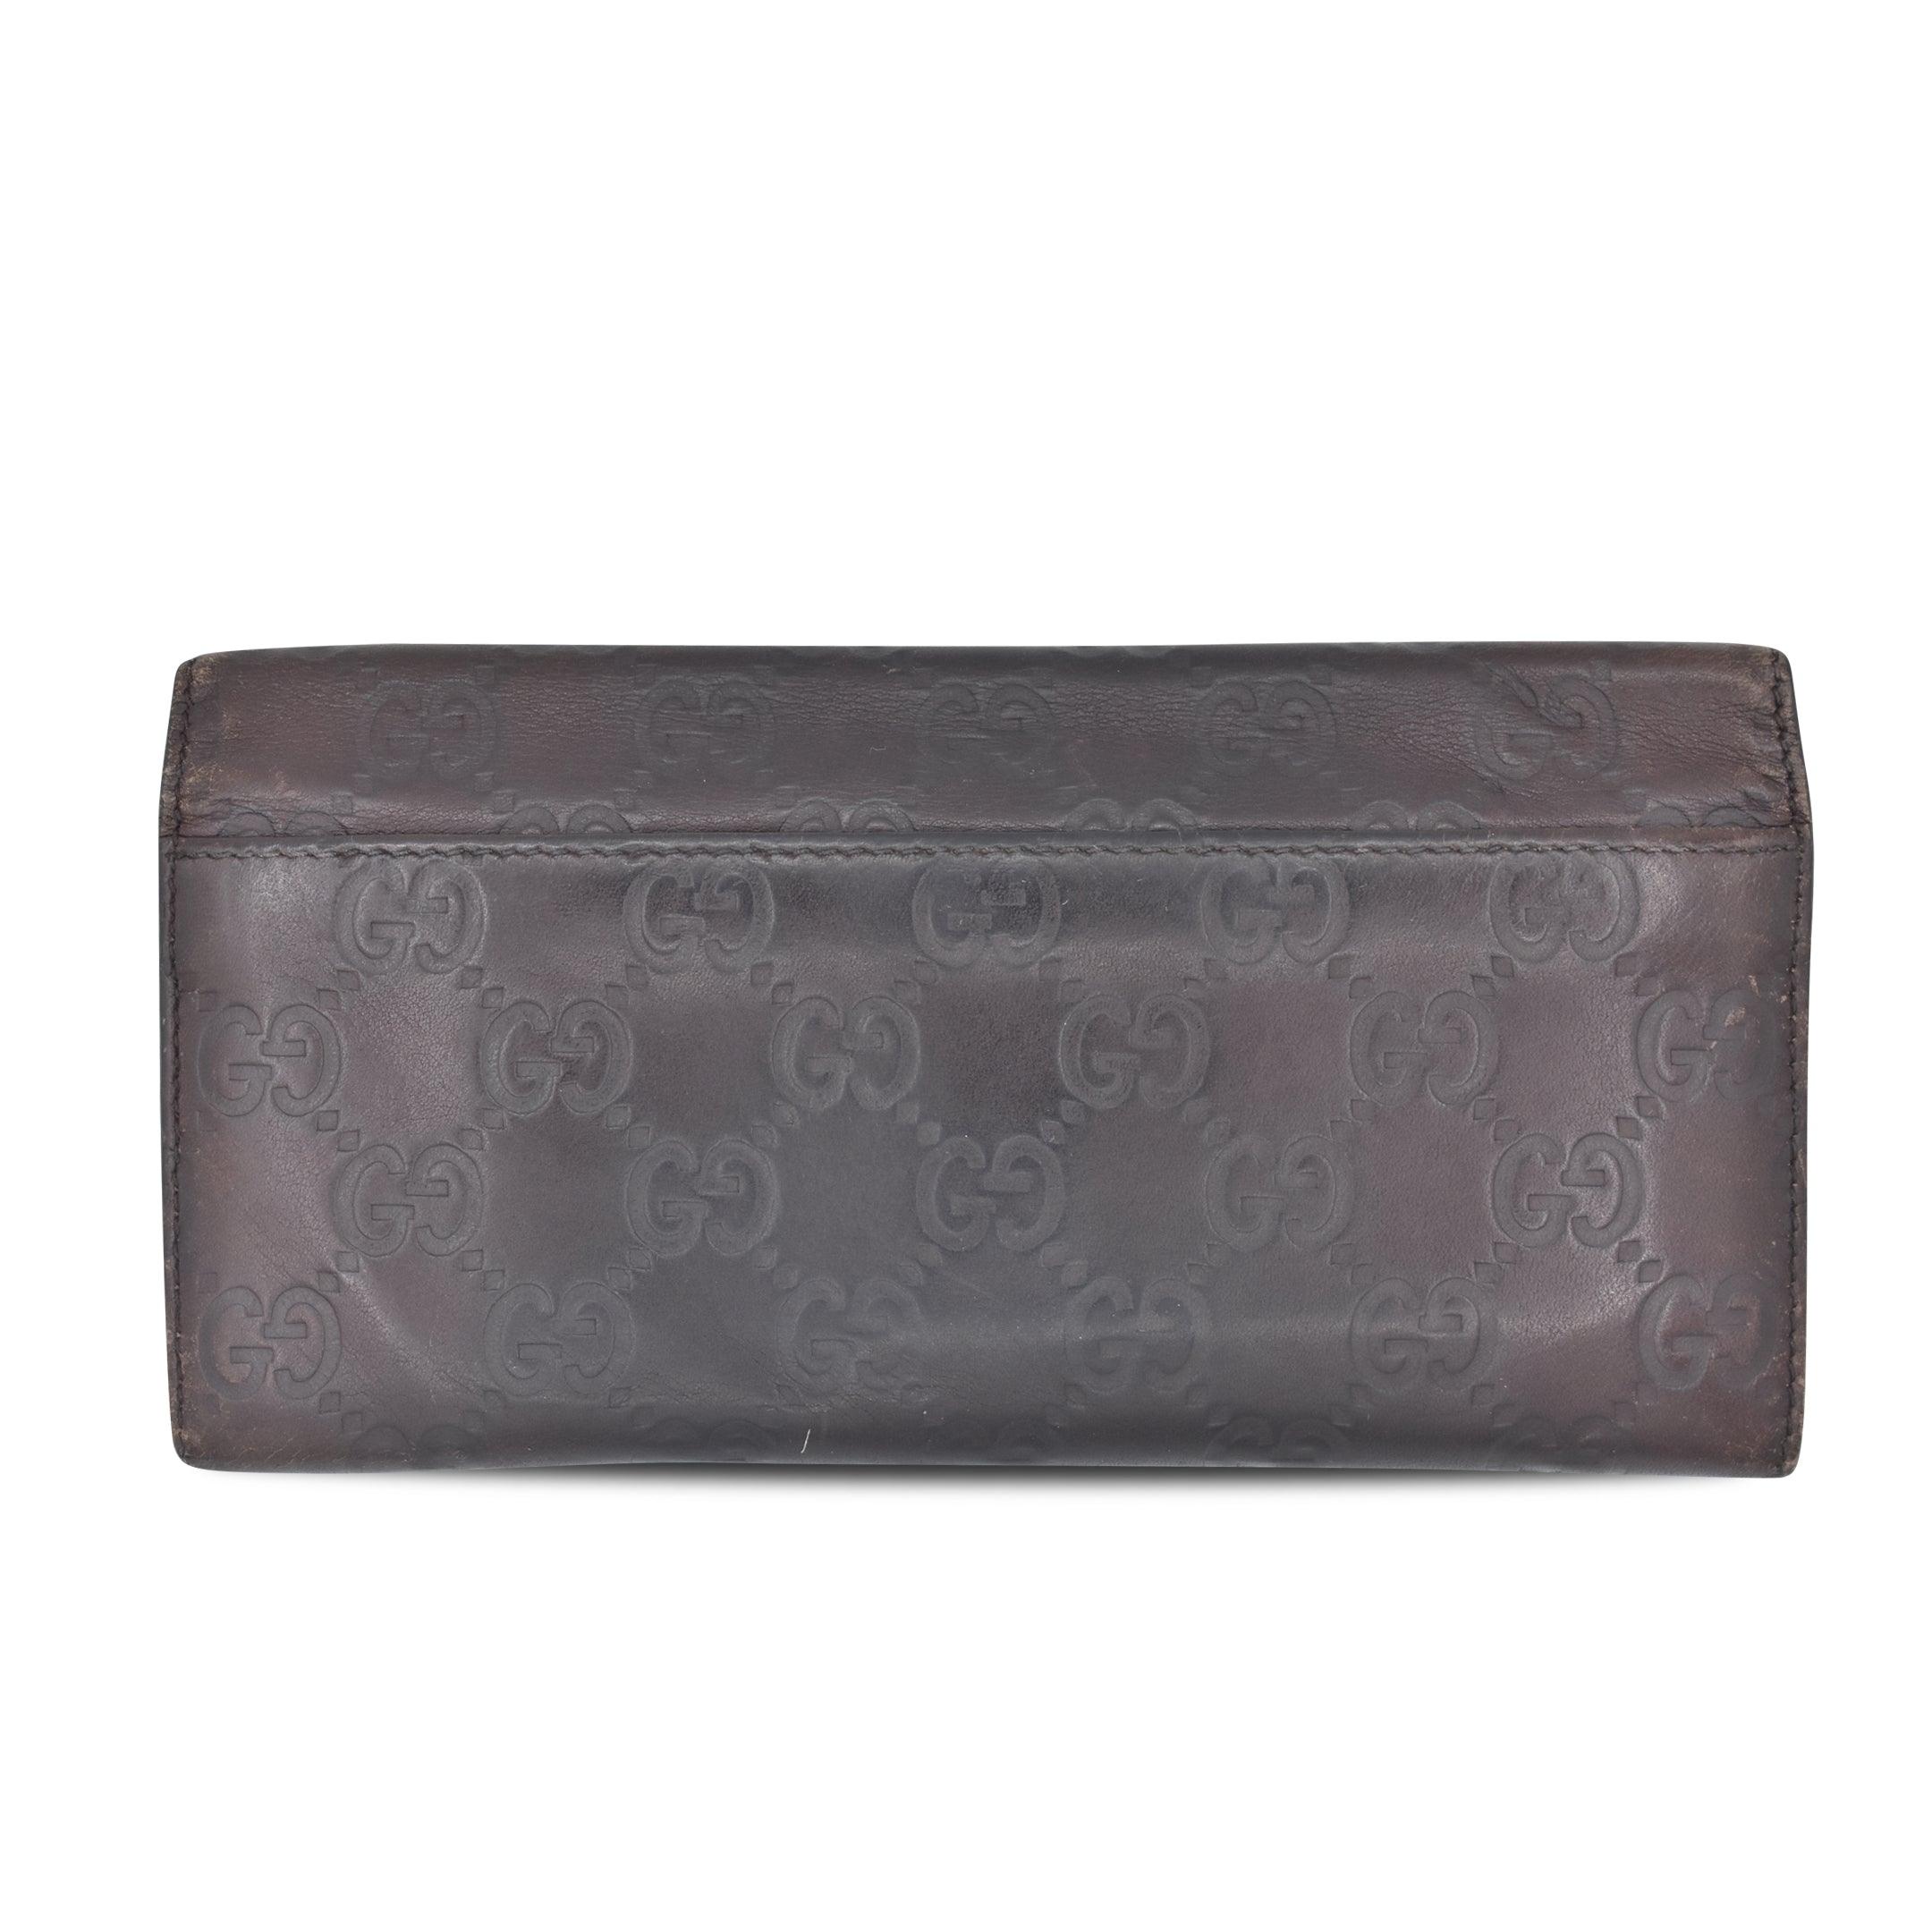 Gucci Long Wallet - Fashionably Yours